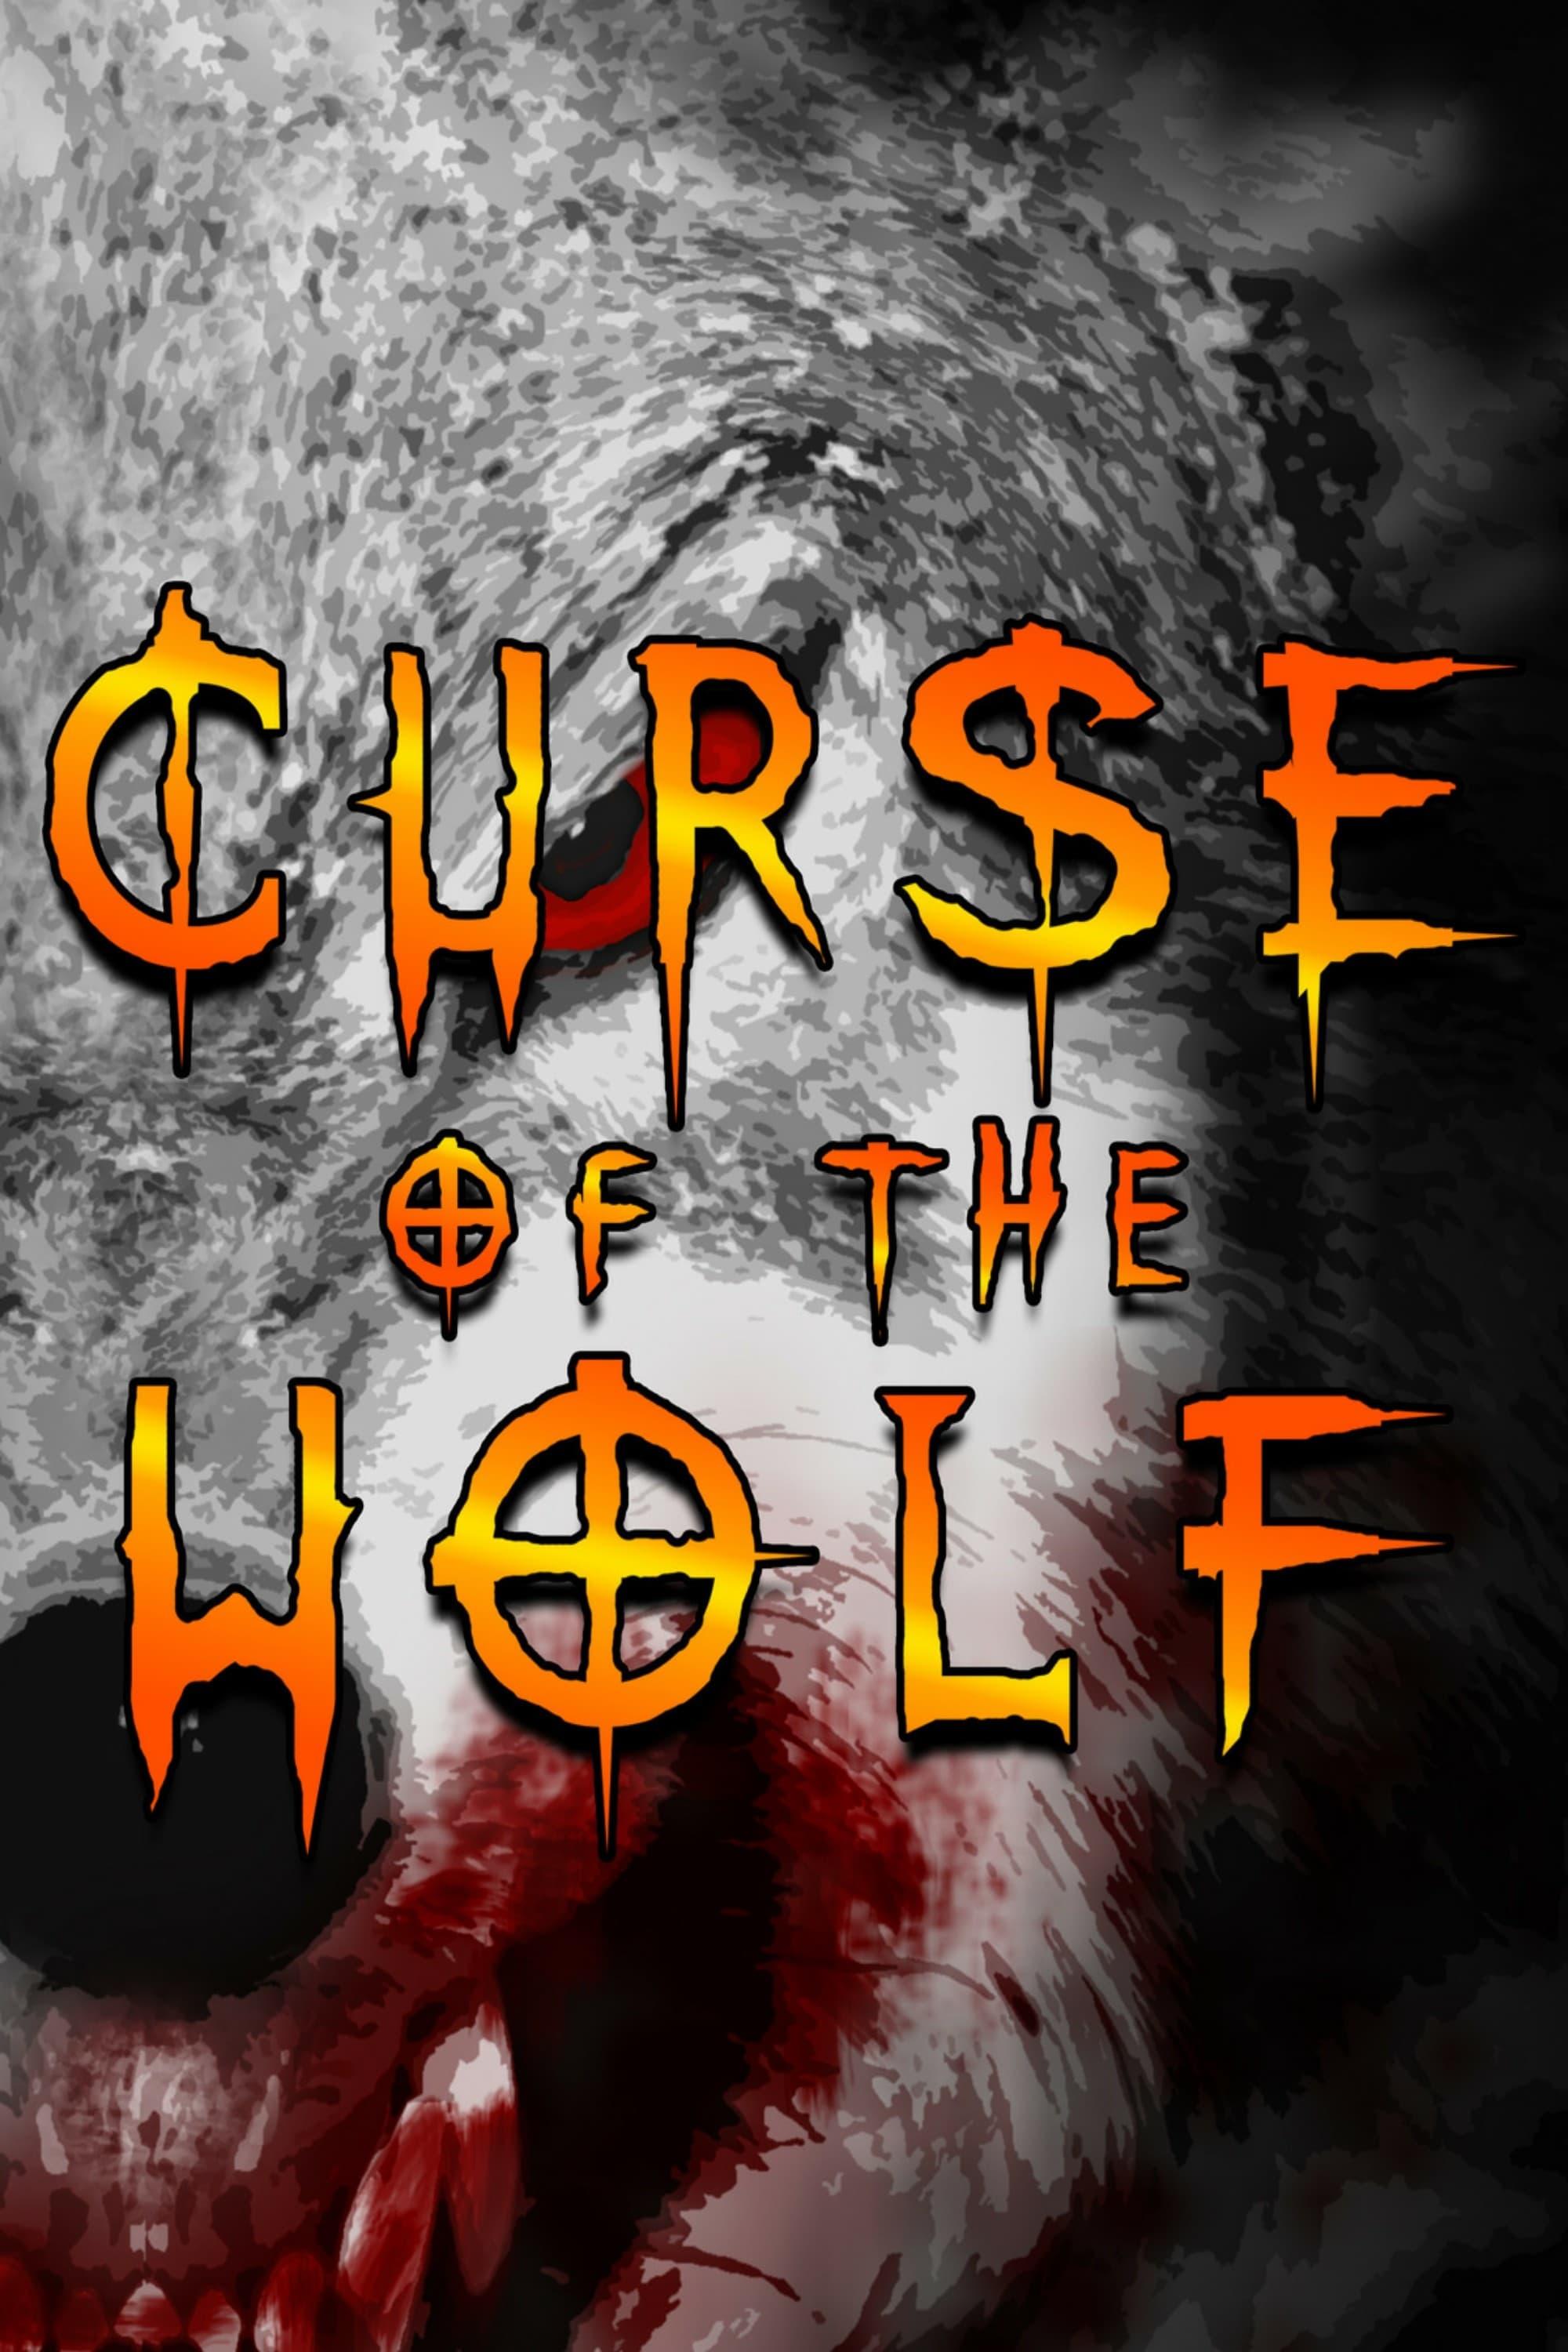 Curse of the Wolf poster